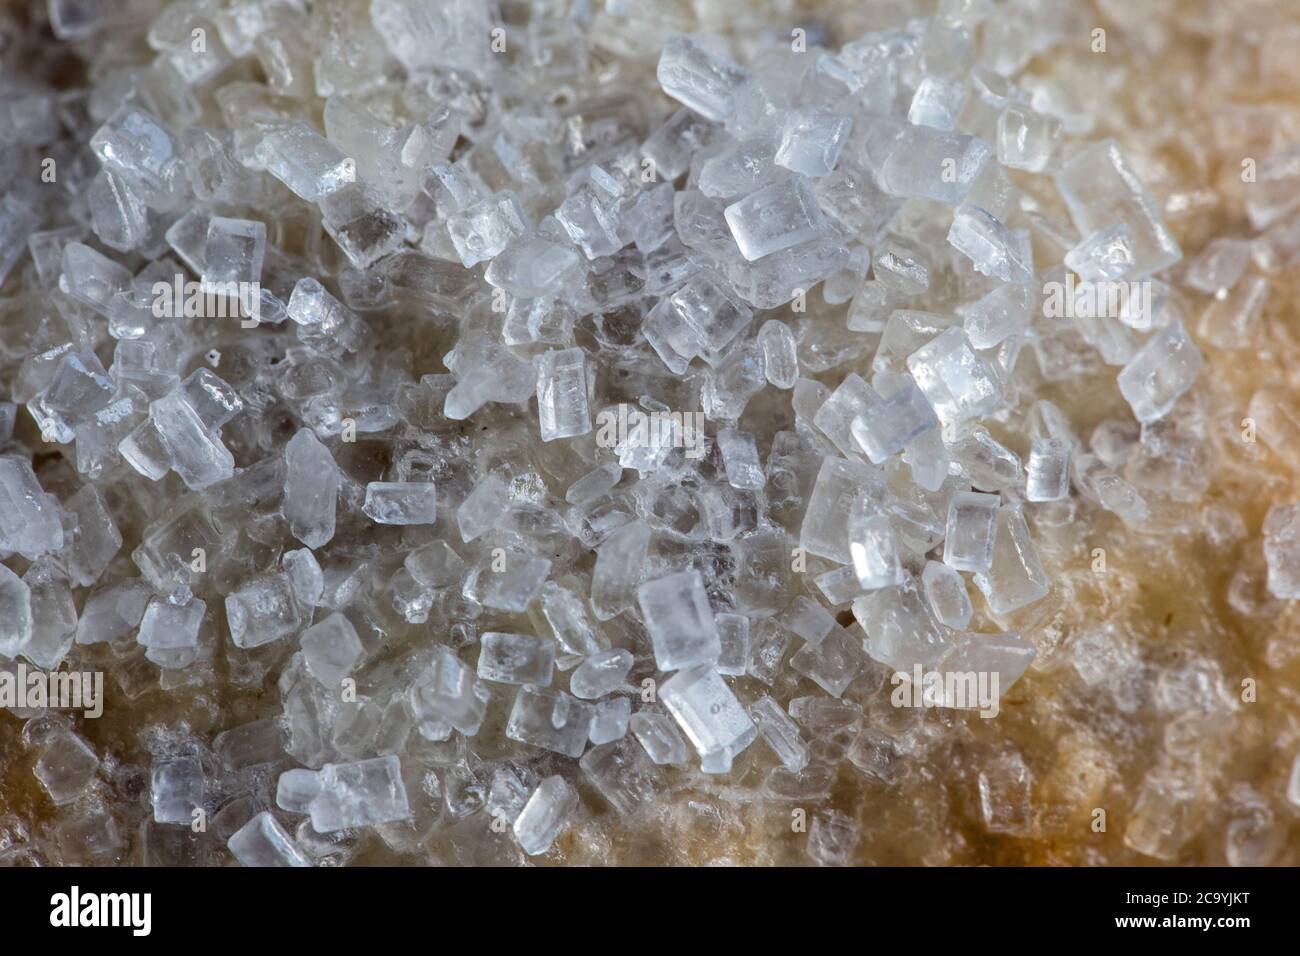 Macro photograph of sugar granules on a golden pastry Stock Photo